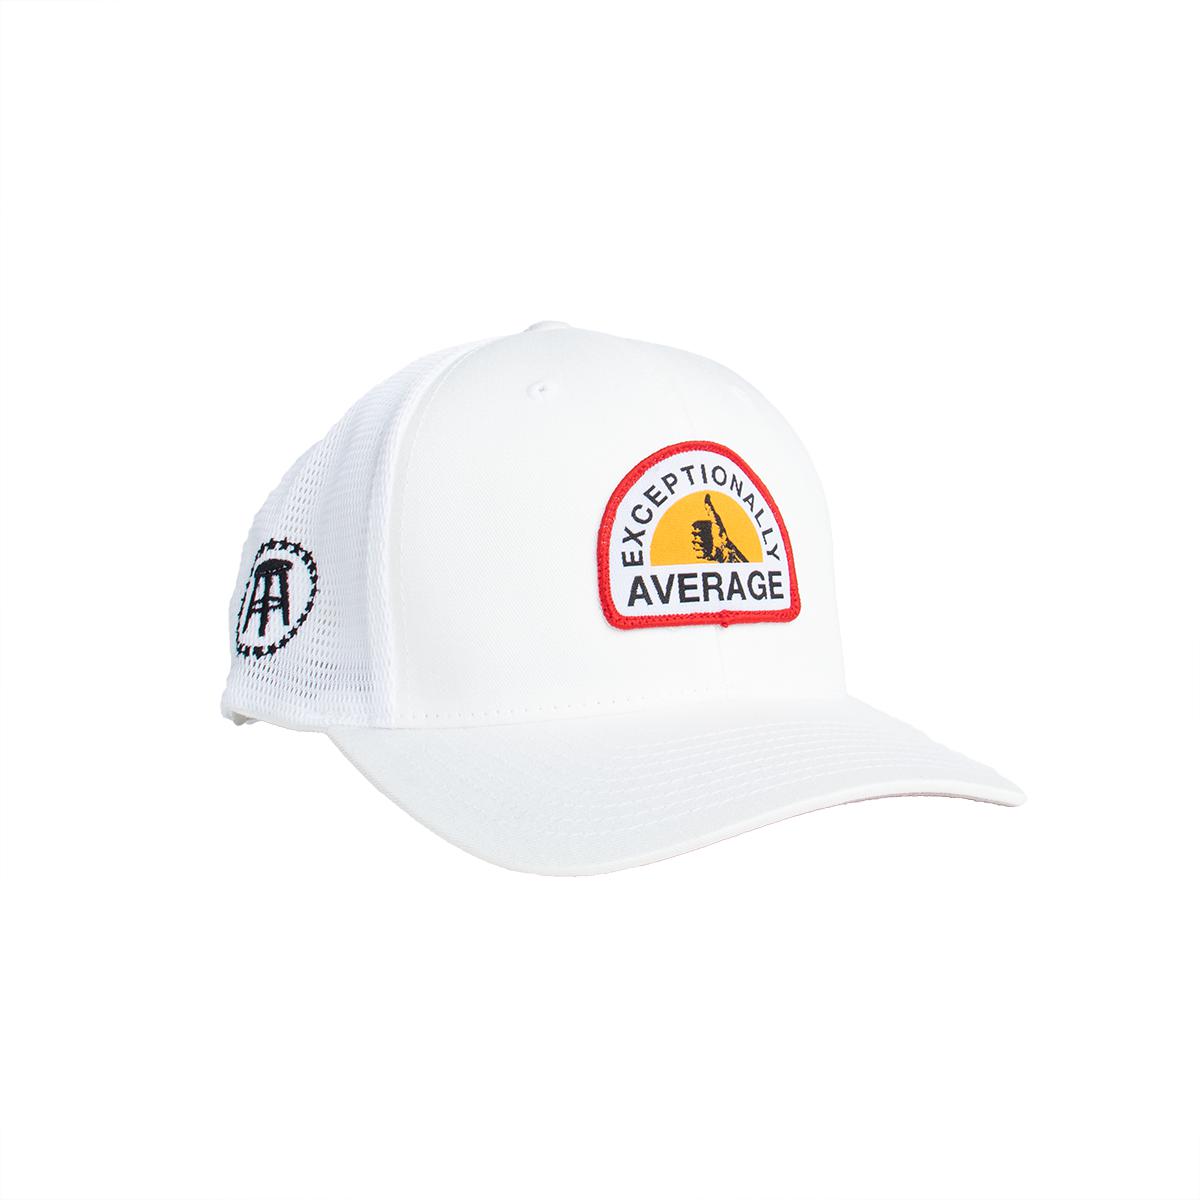 Exceptionally Average Patch Trucker Hat-Hats-PlanBri Uncut-White-One Size-Barstool Sports